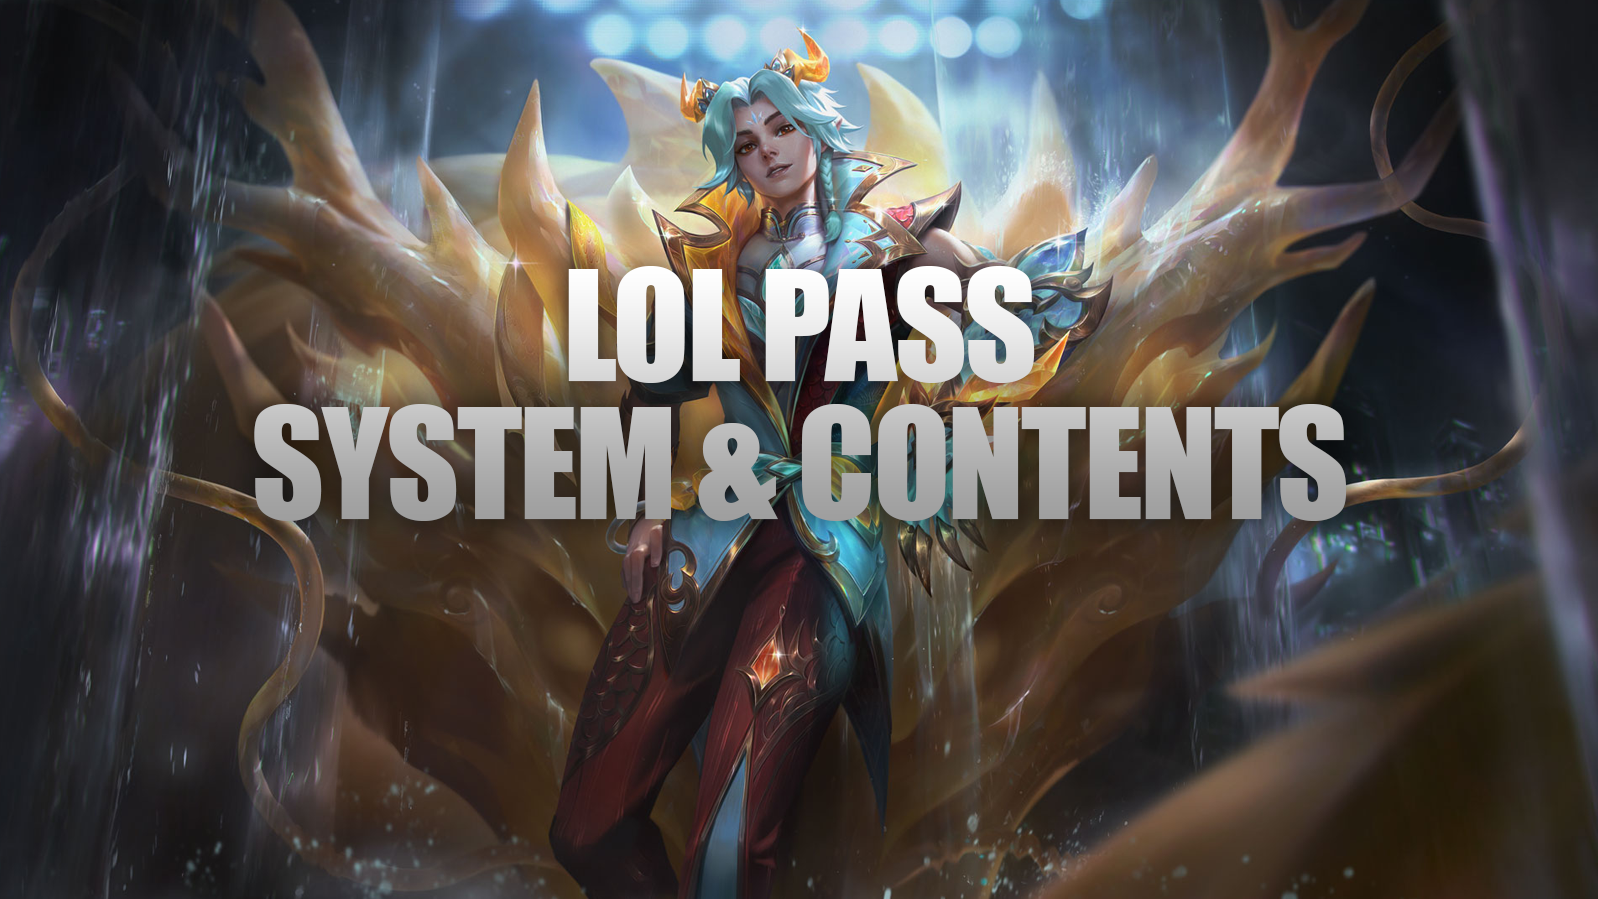 The LoL Lunar Revel Pass is a 55-tier pass system. Players progress through the initial 55 pass levels by completing event missions that award pass points. Each level requires a certain threshold of points to unlock the reward for that tier. After reaching level 55, you can continue earning pass points to receive repeatable rewards every 20 tokens per level.